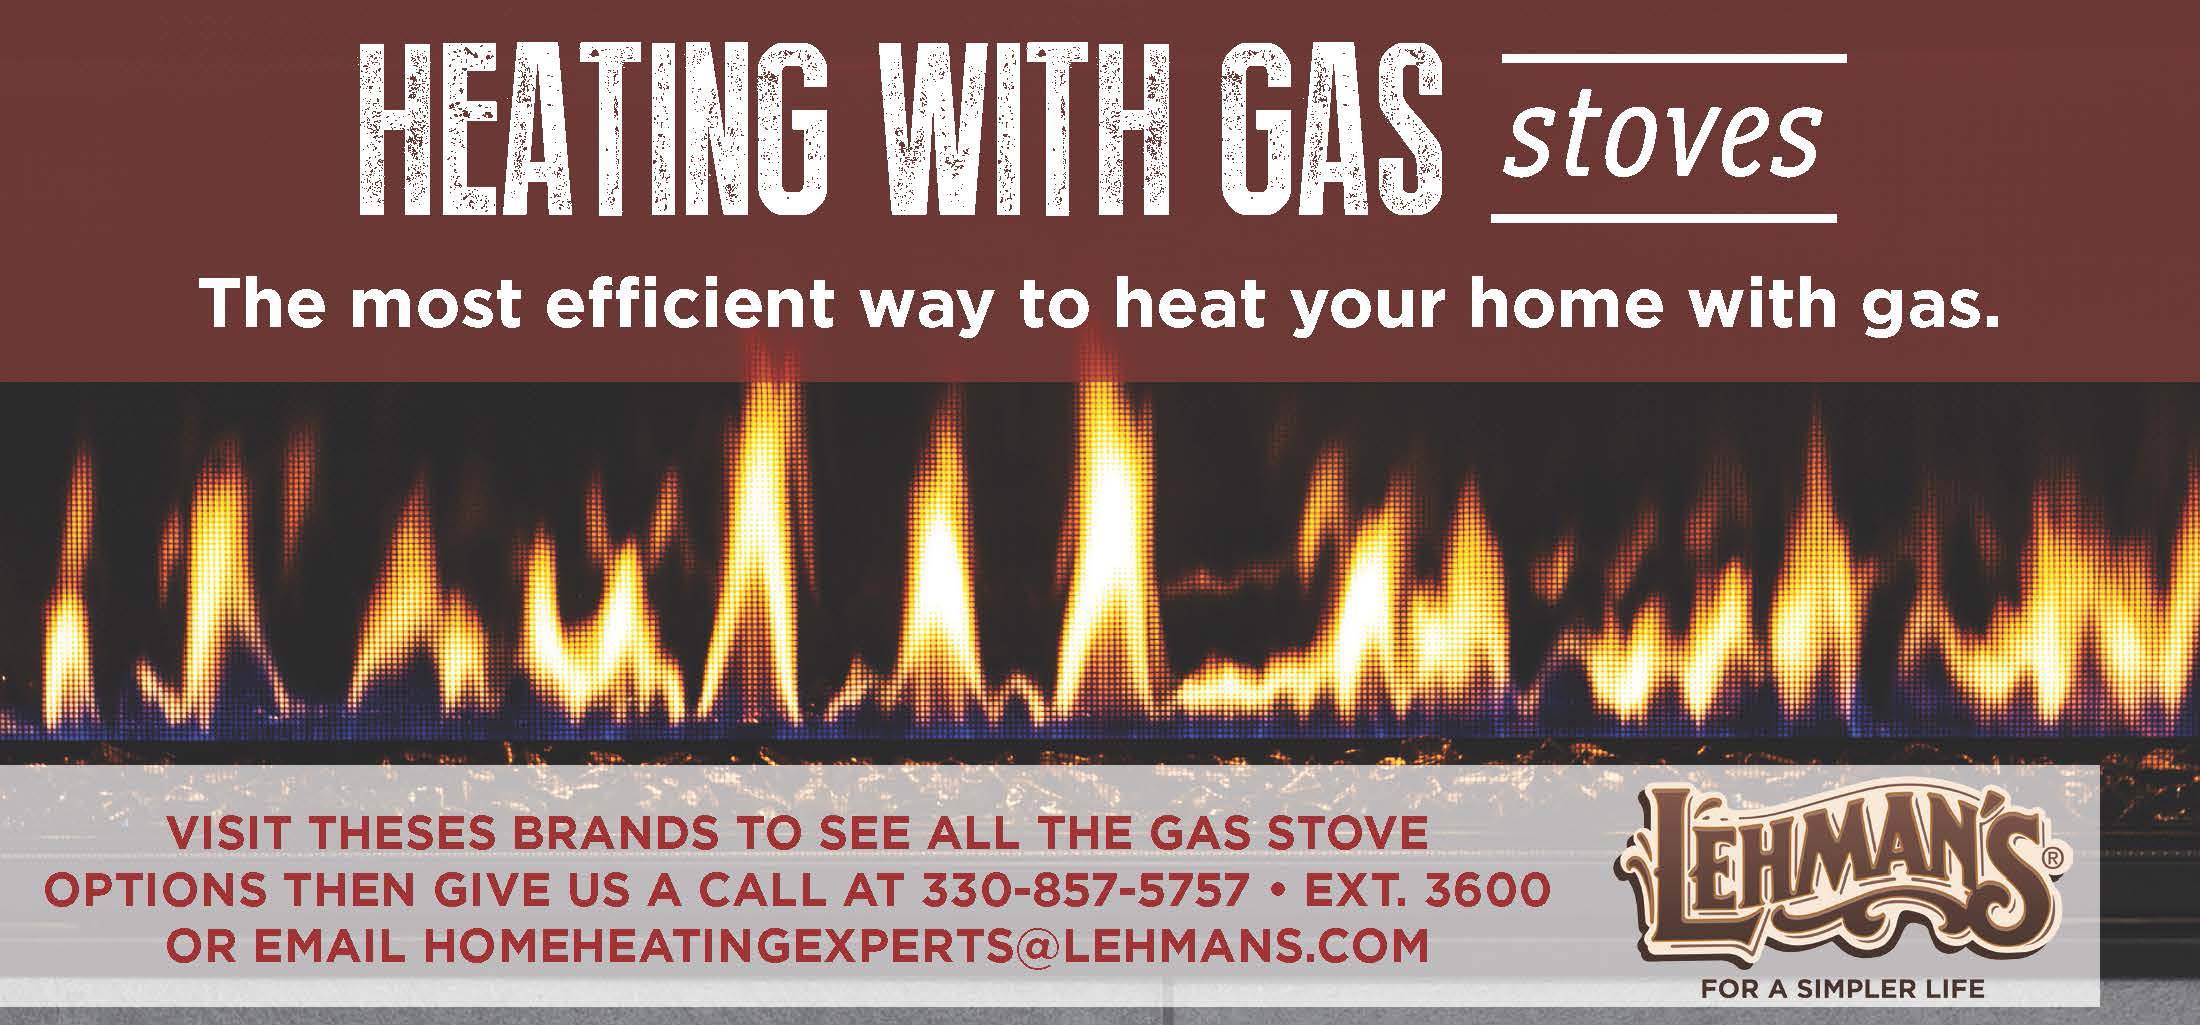 Heating with Gas Stoves